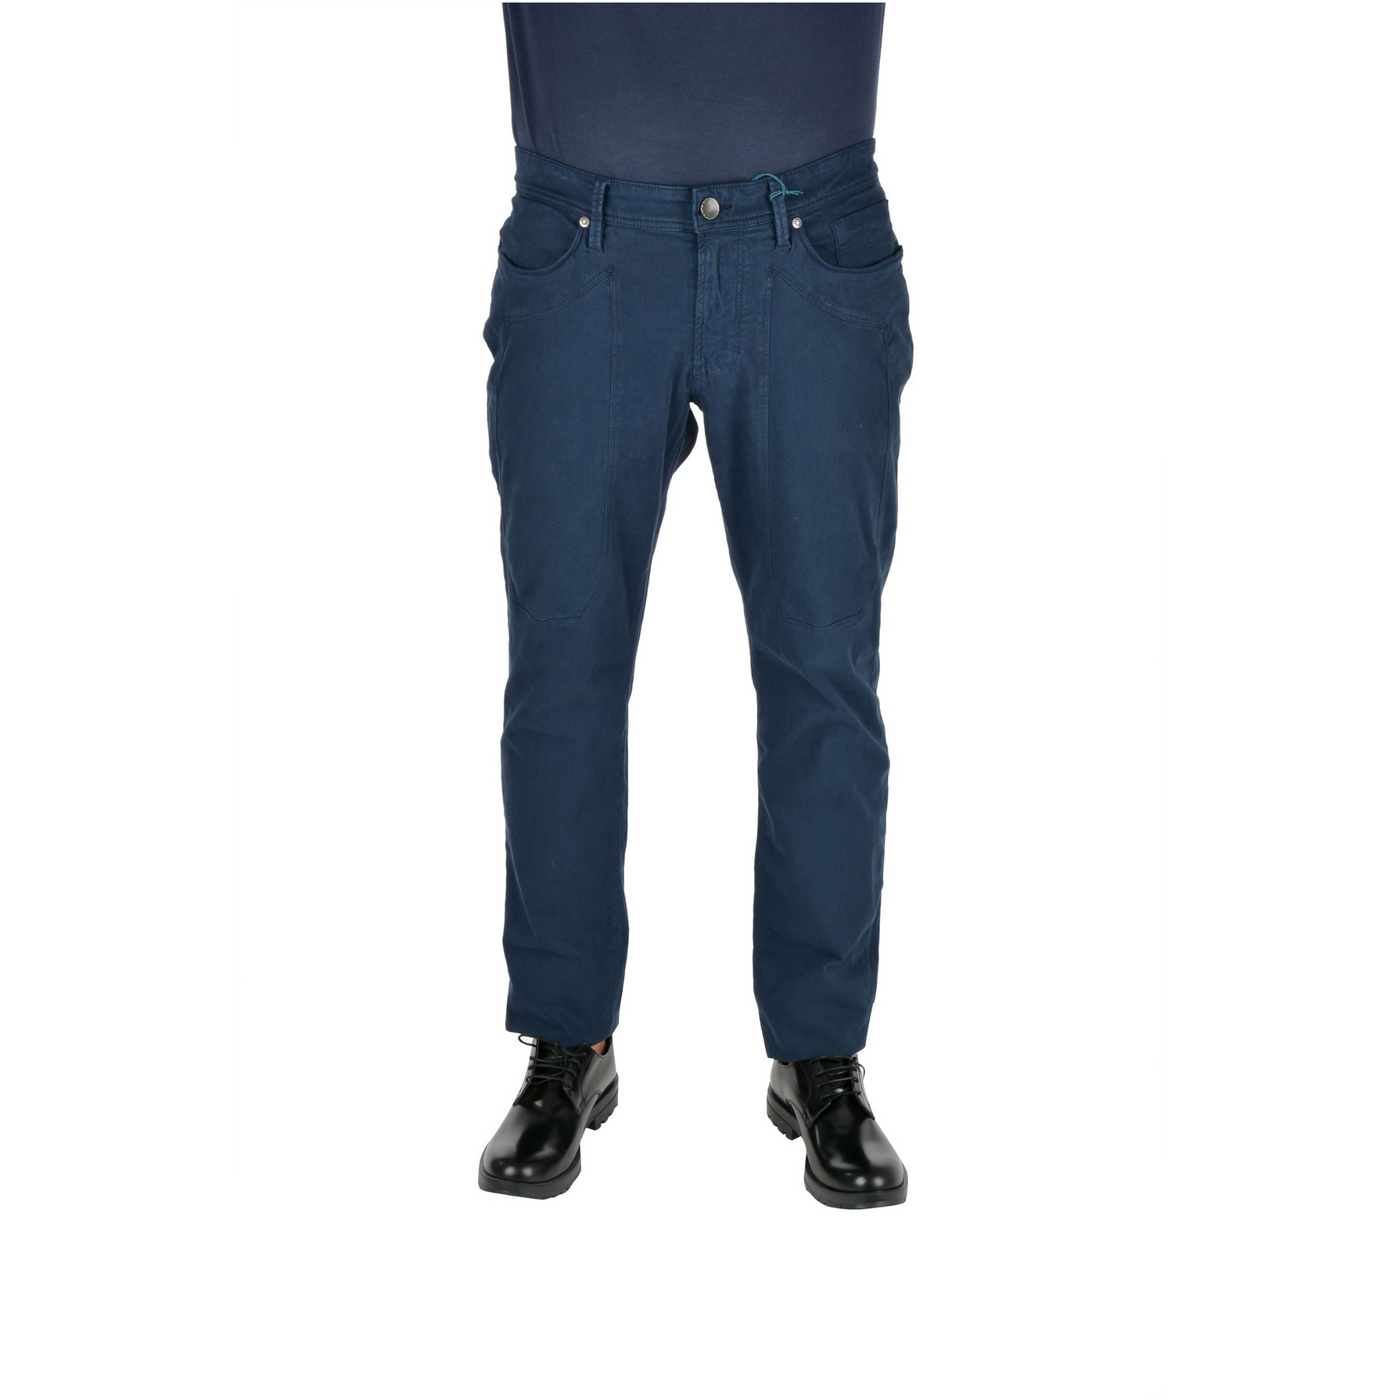 Men's trousers with tone-on-tone patches